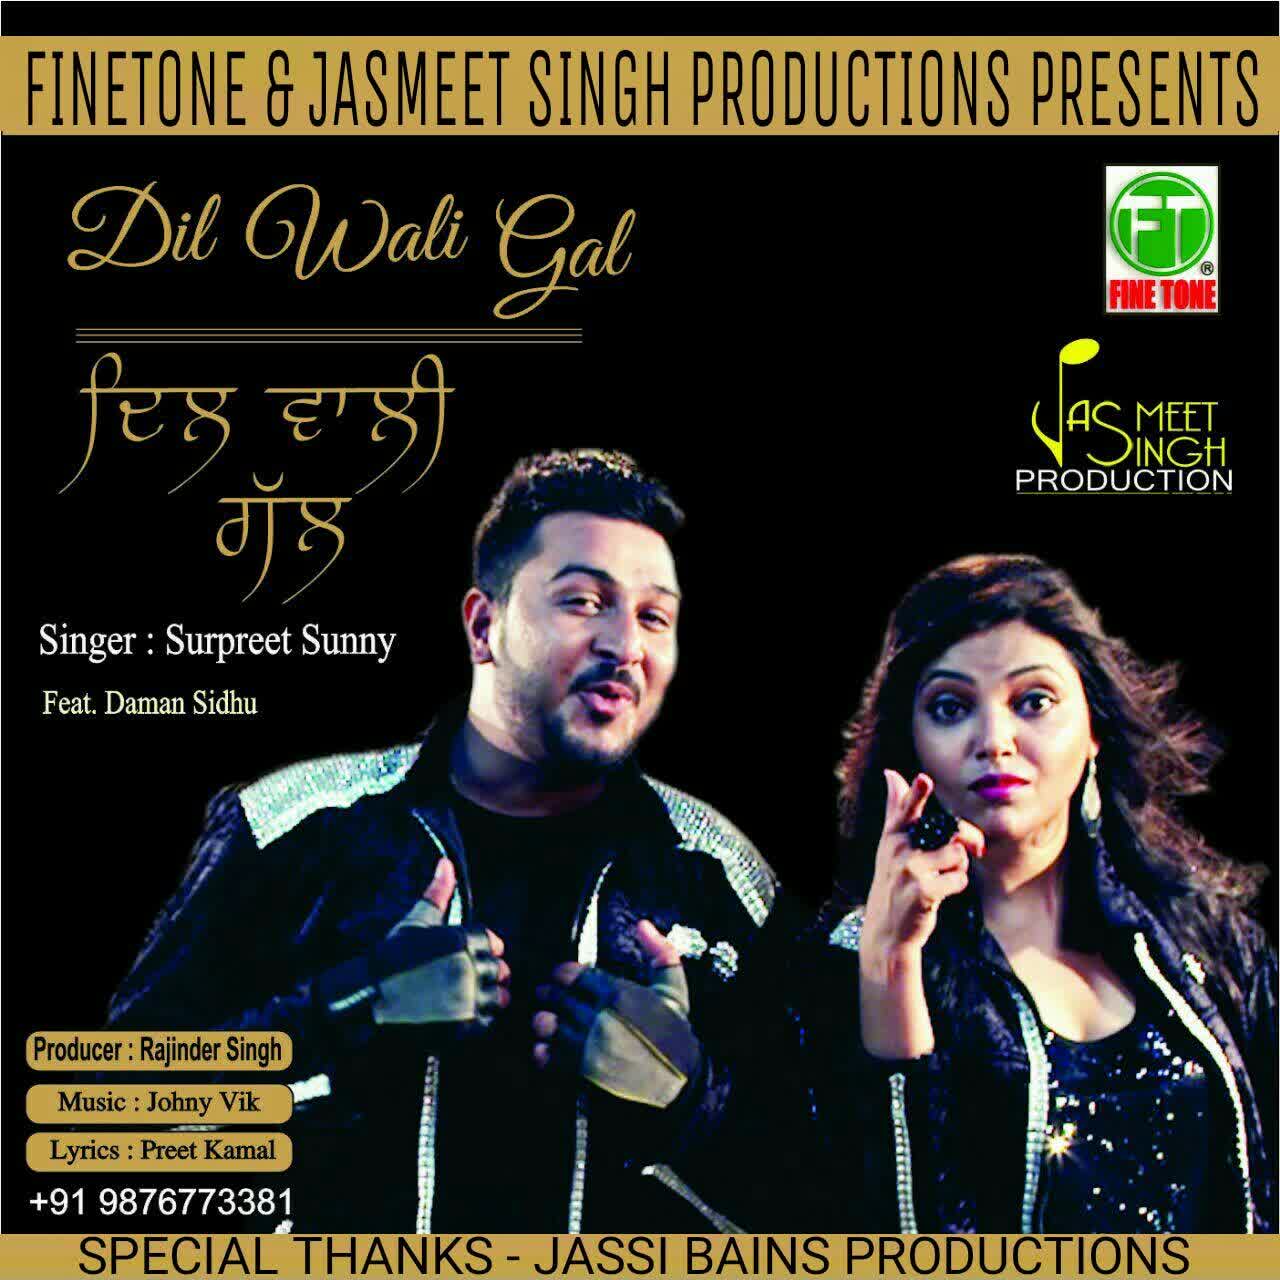 Dil Wali Gall Surpreet Sunny  Mp3 song download